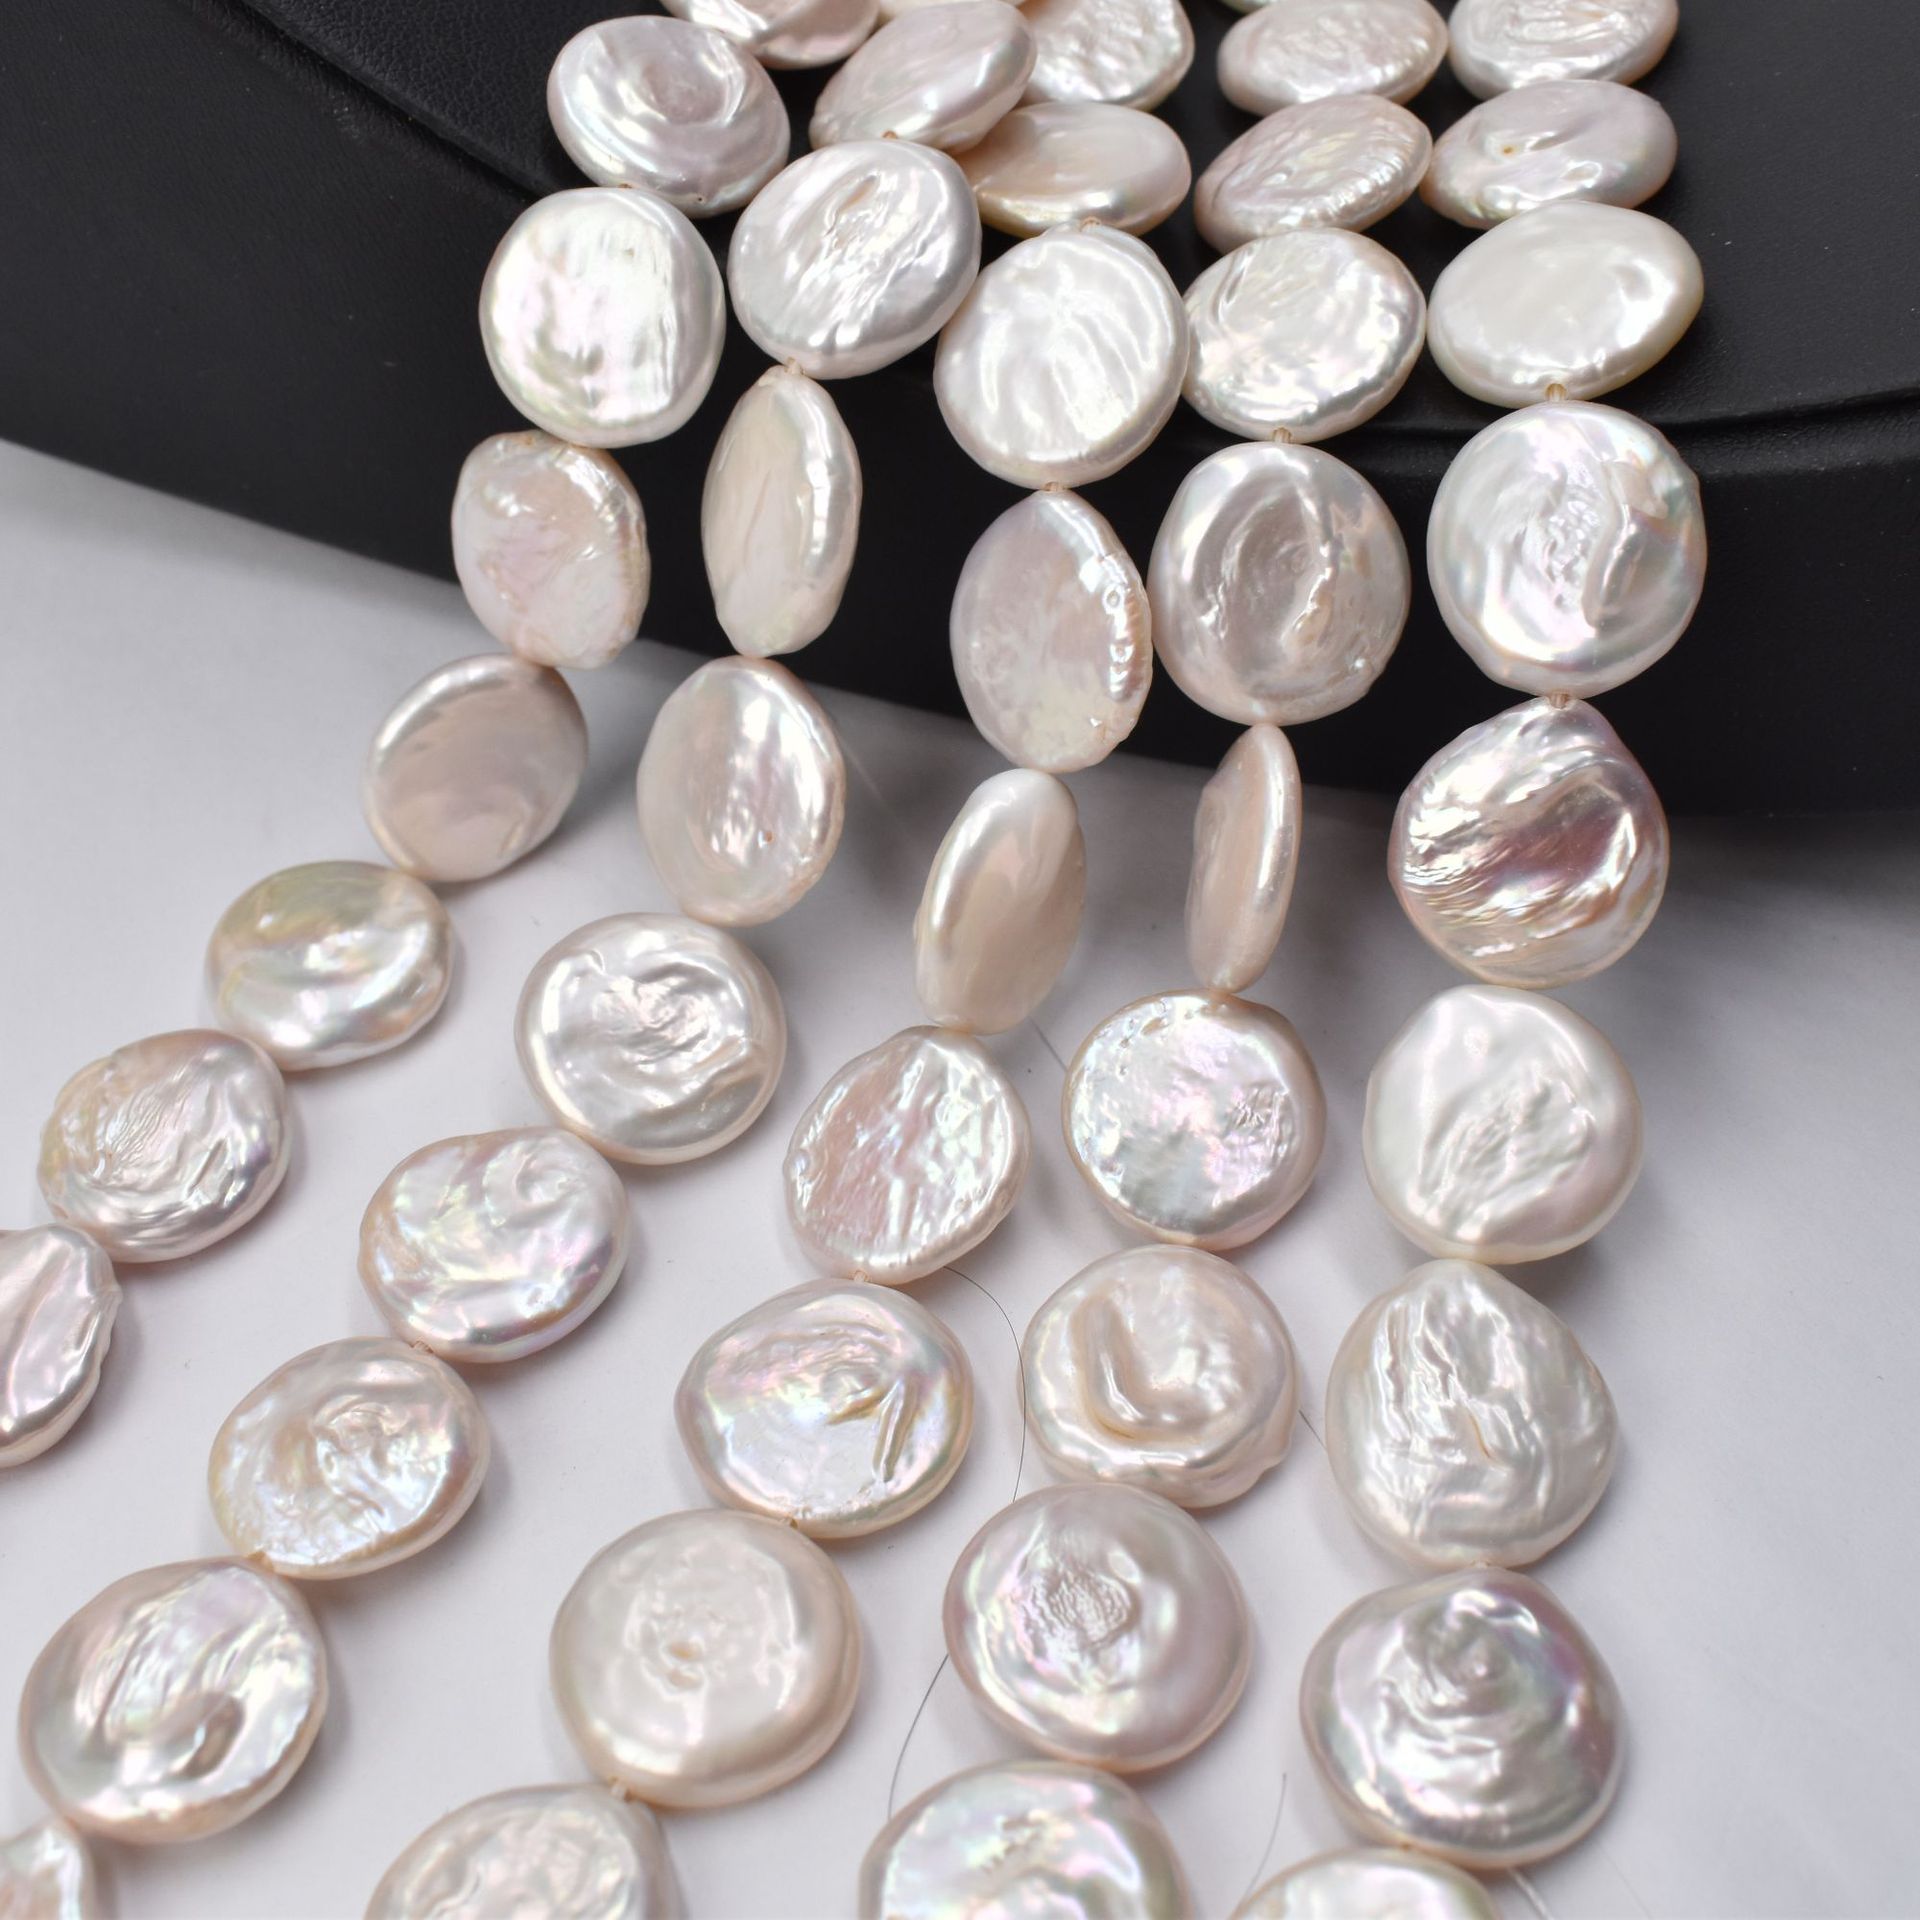 Baroque is shaped 16-17mm straight hole button beads round coin shape bead pendant semi-finished fresh water pearl